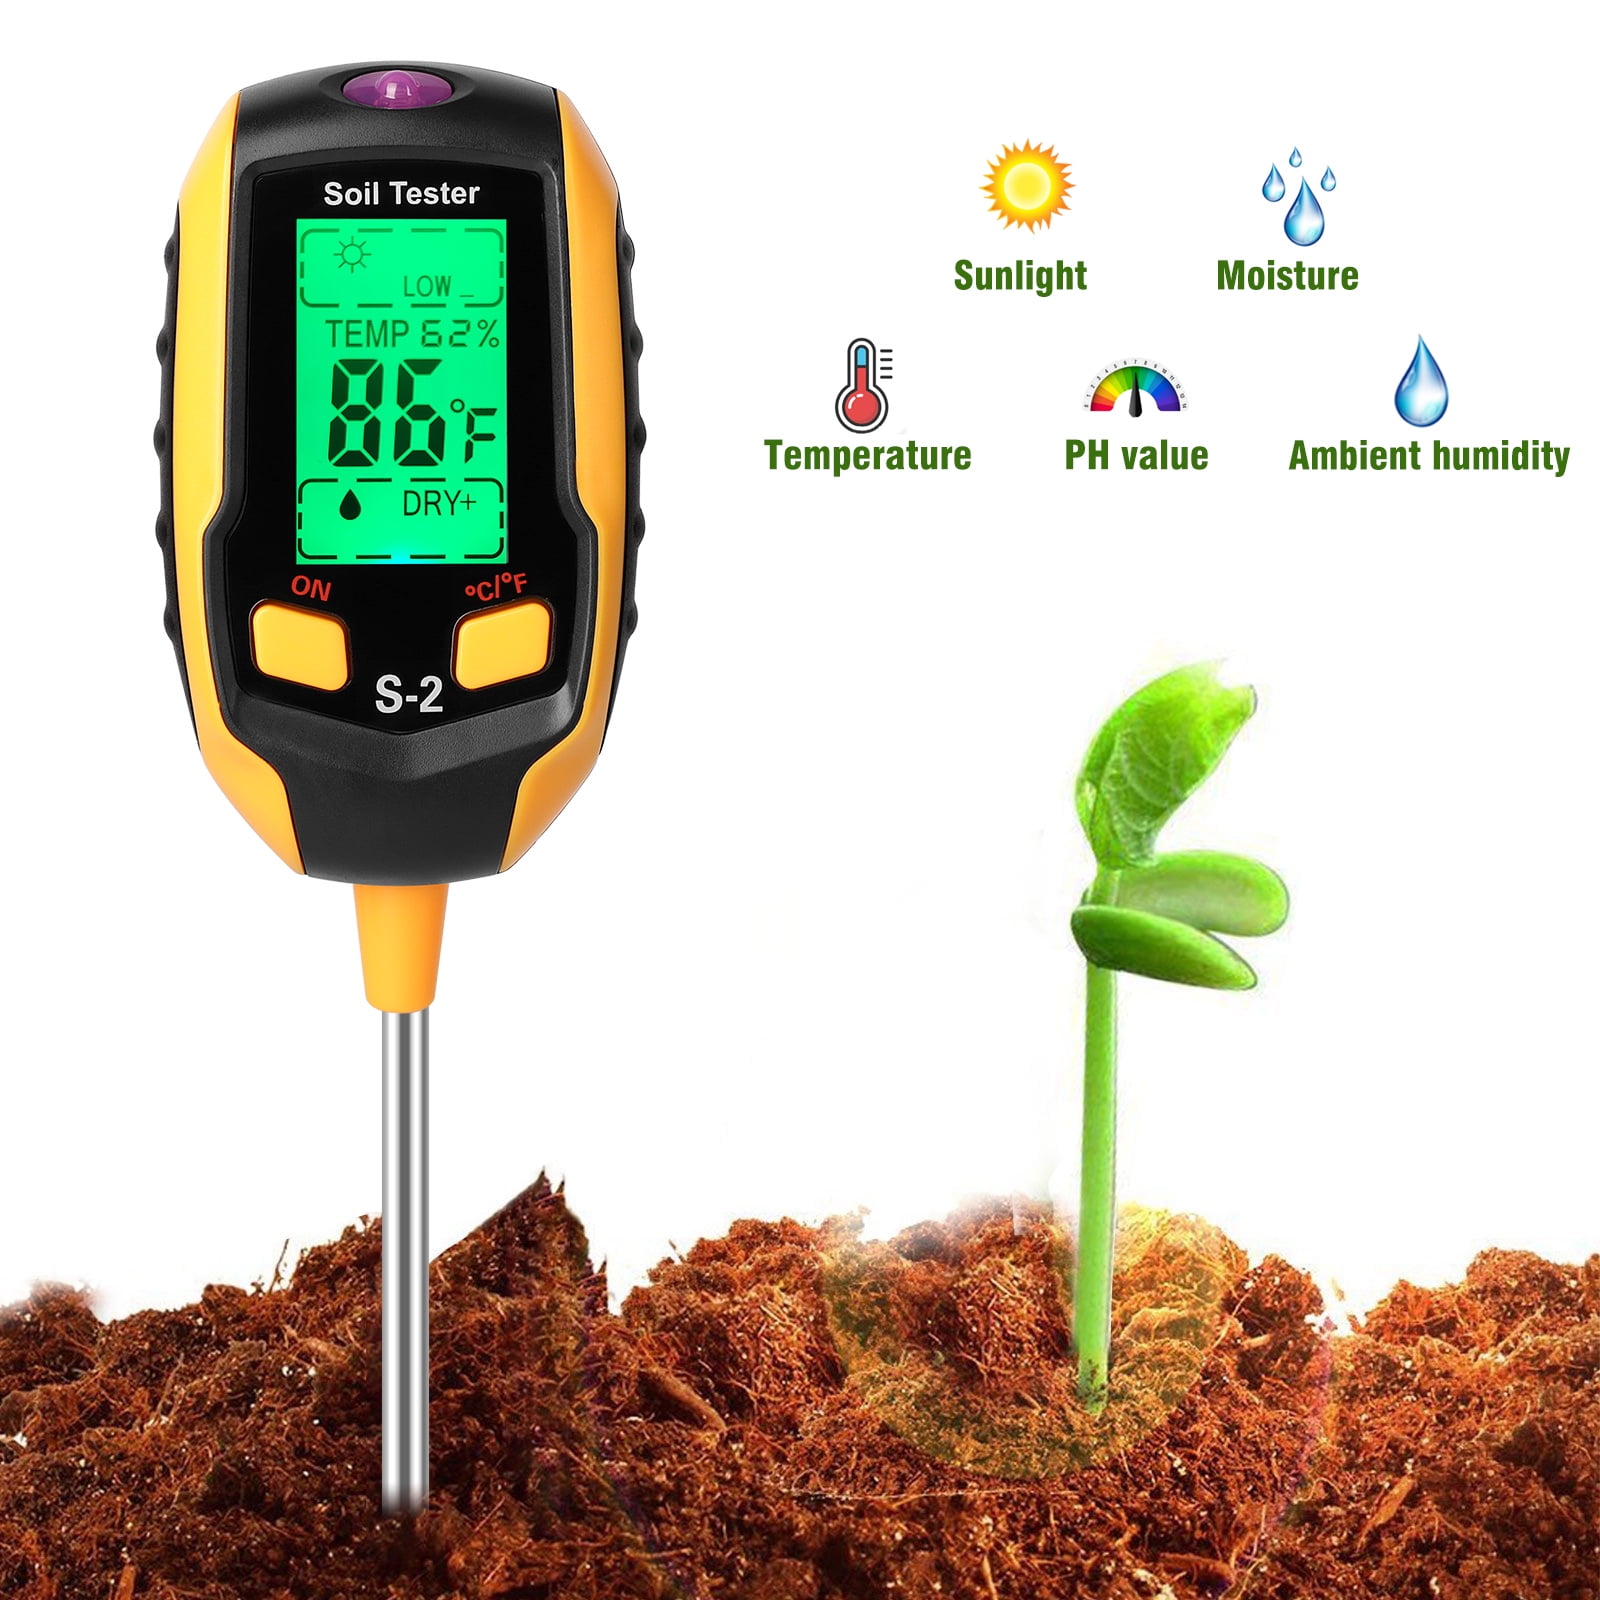 SOIL THERMOMETER GARDEN TEST COMPOST SEEDS GROWING SEEDLINGS PLANTS IN-054